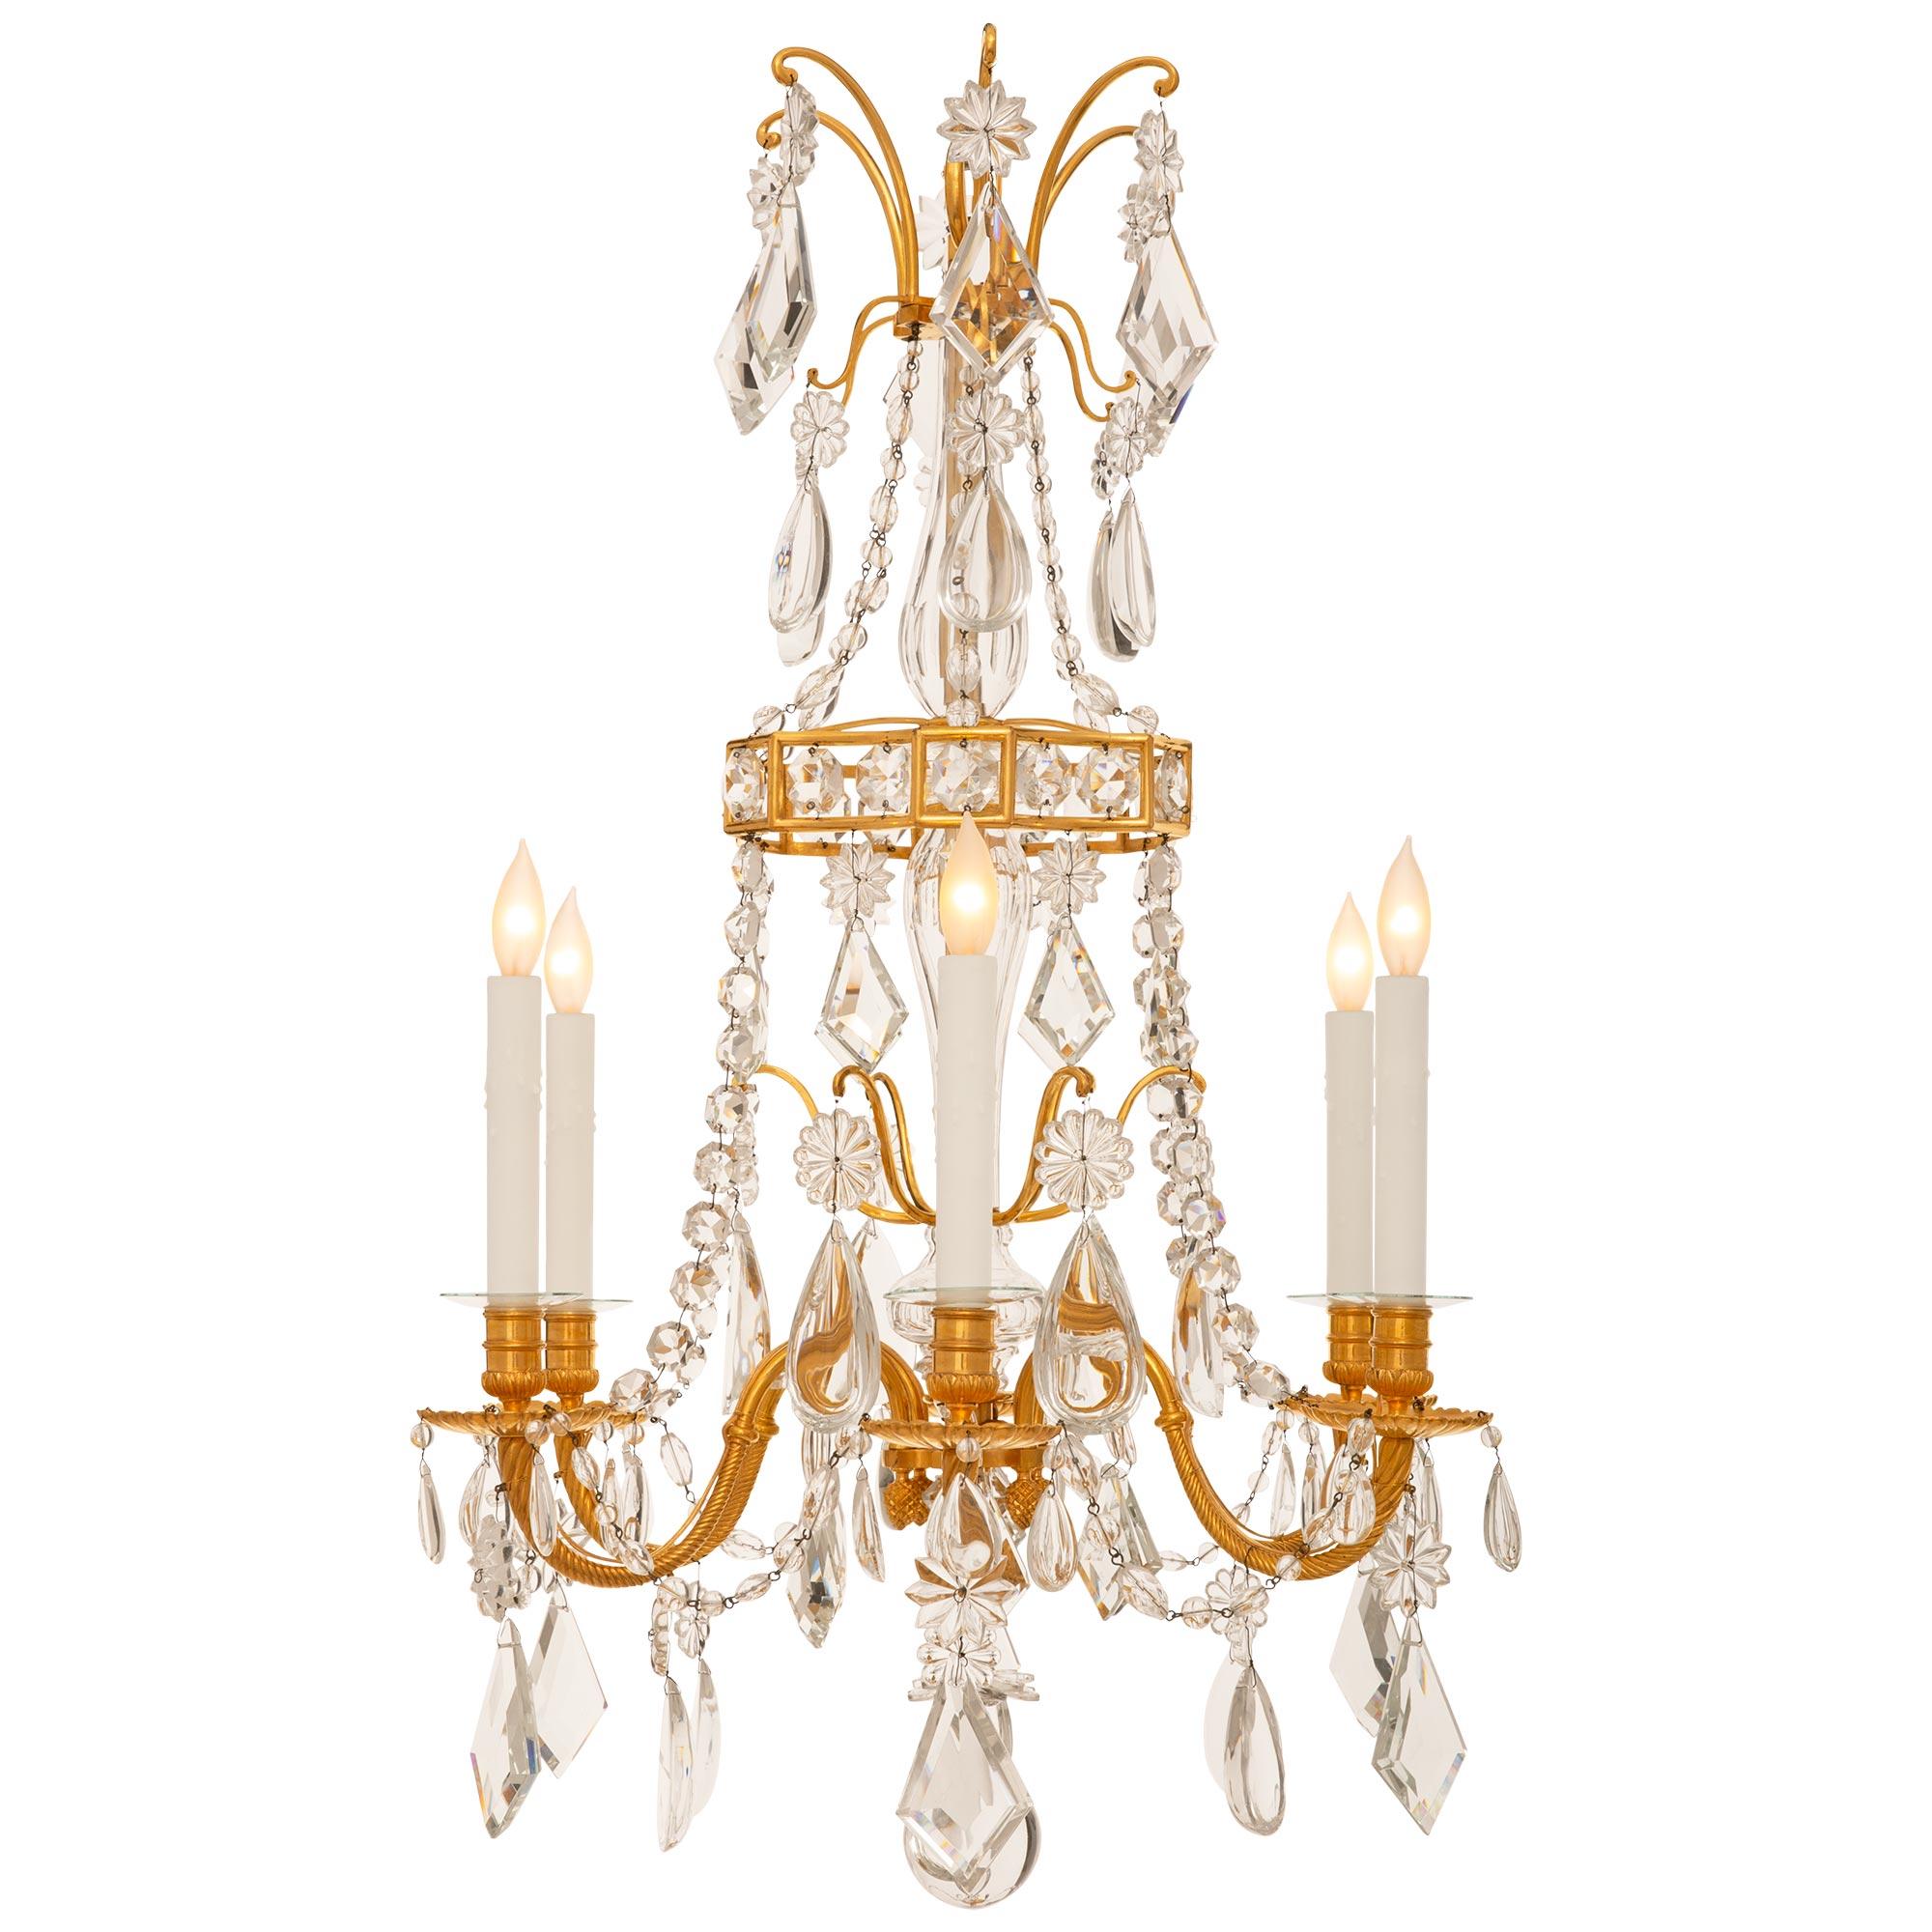 pair of French 19th century Louis XVI st Ormolu and Baccarat Crystal chandeliers In Good Condition For Sale In West Palm Beach, FL